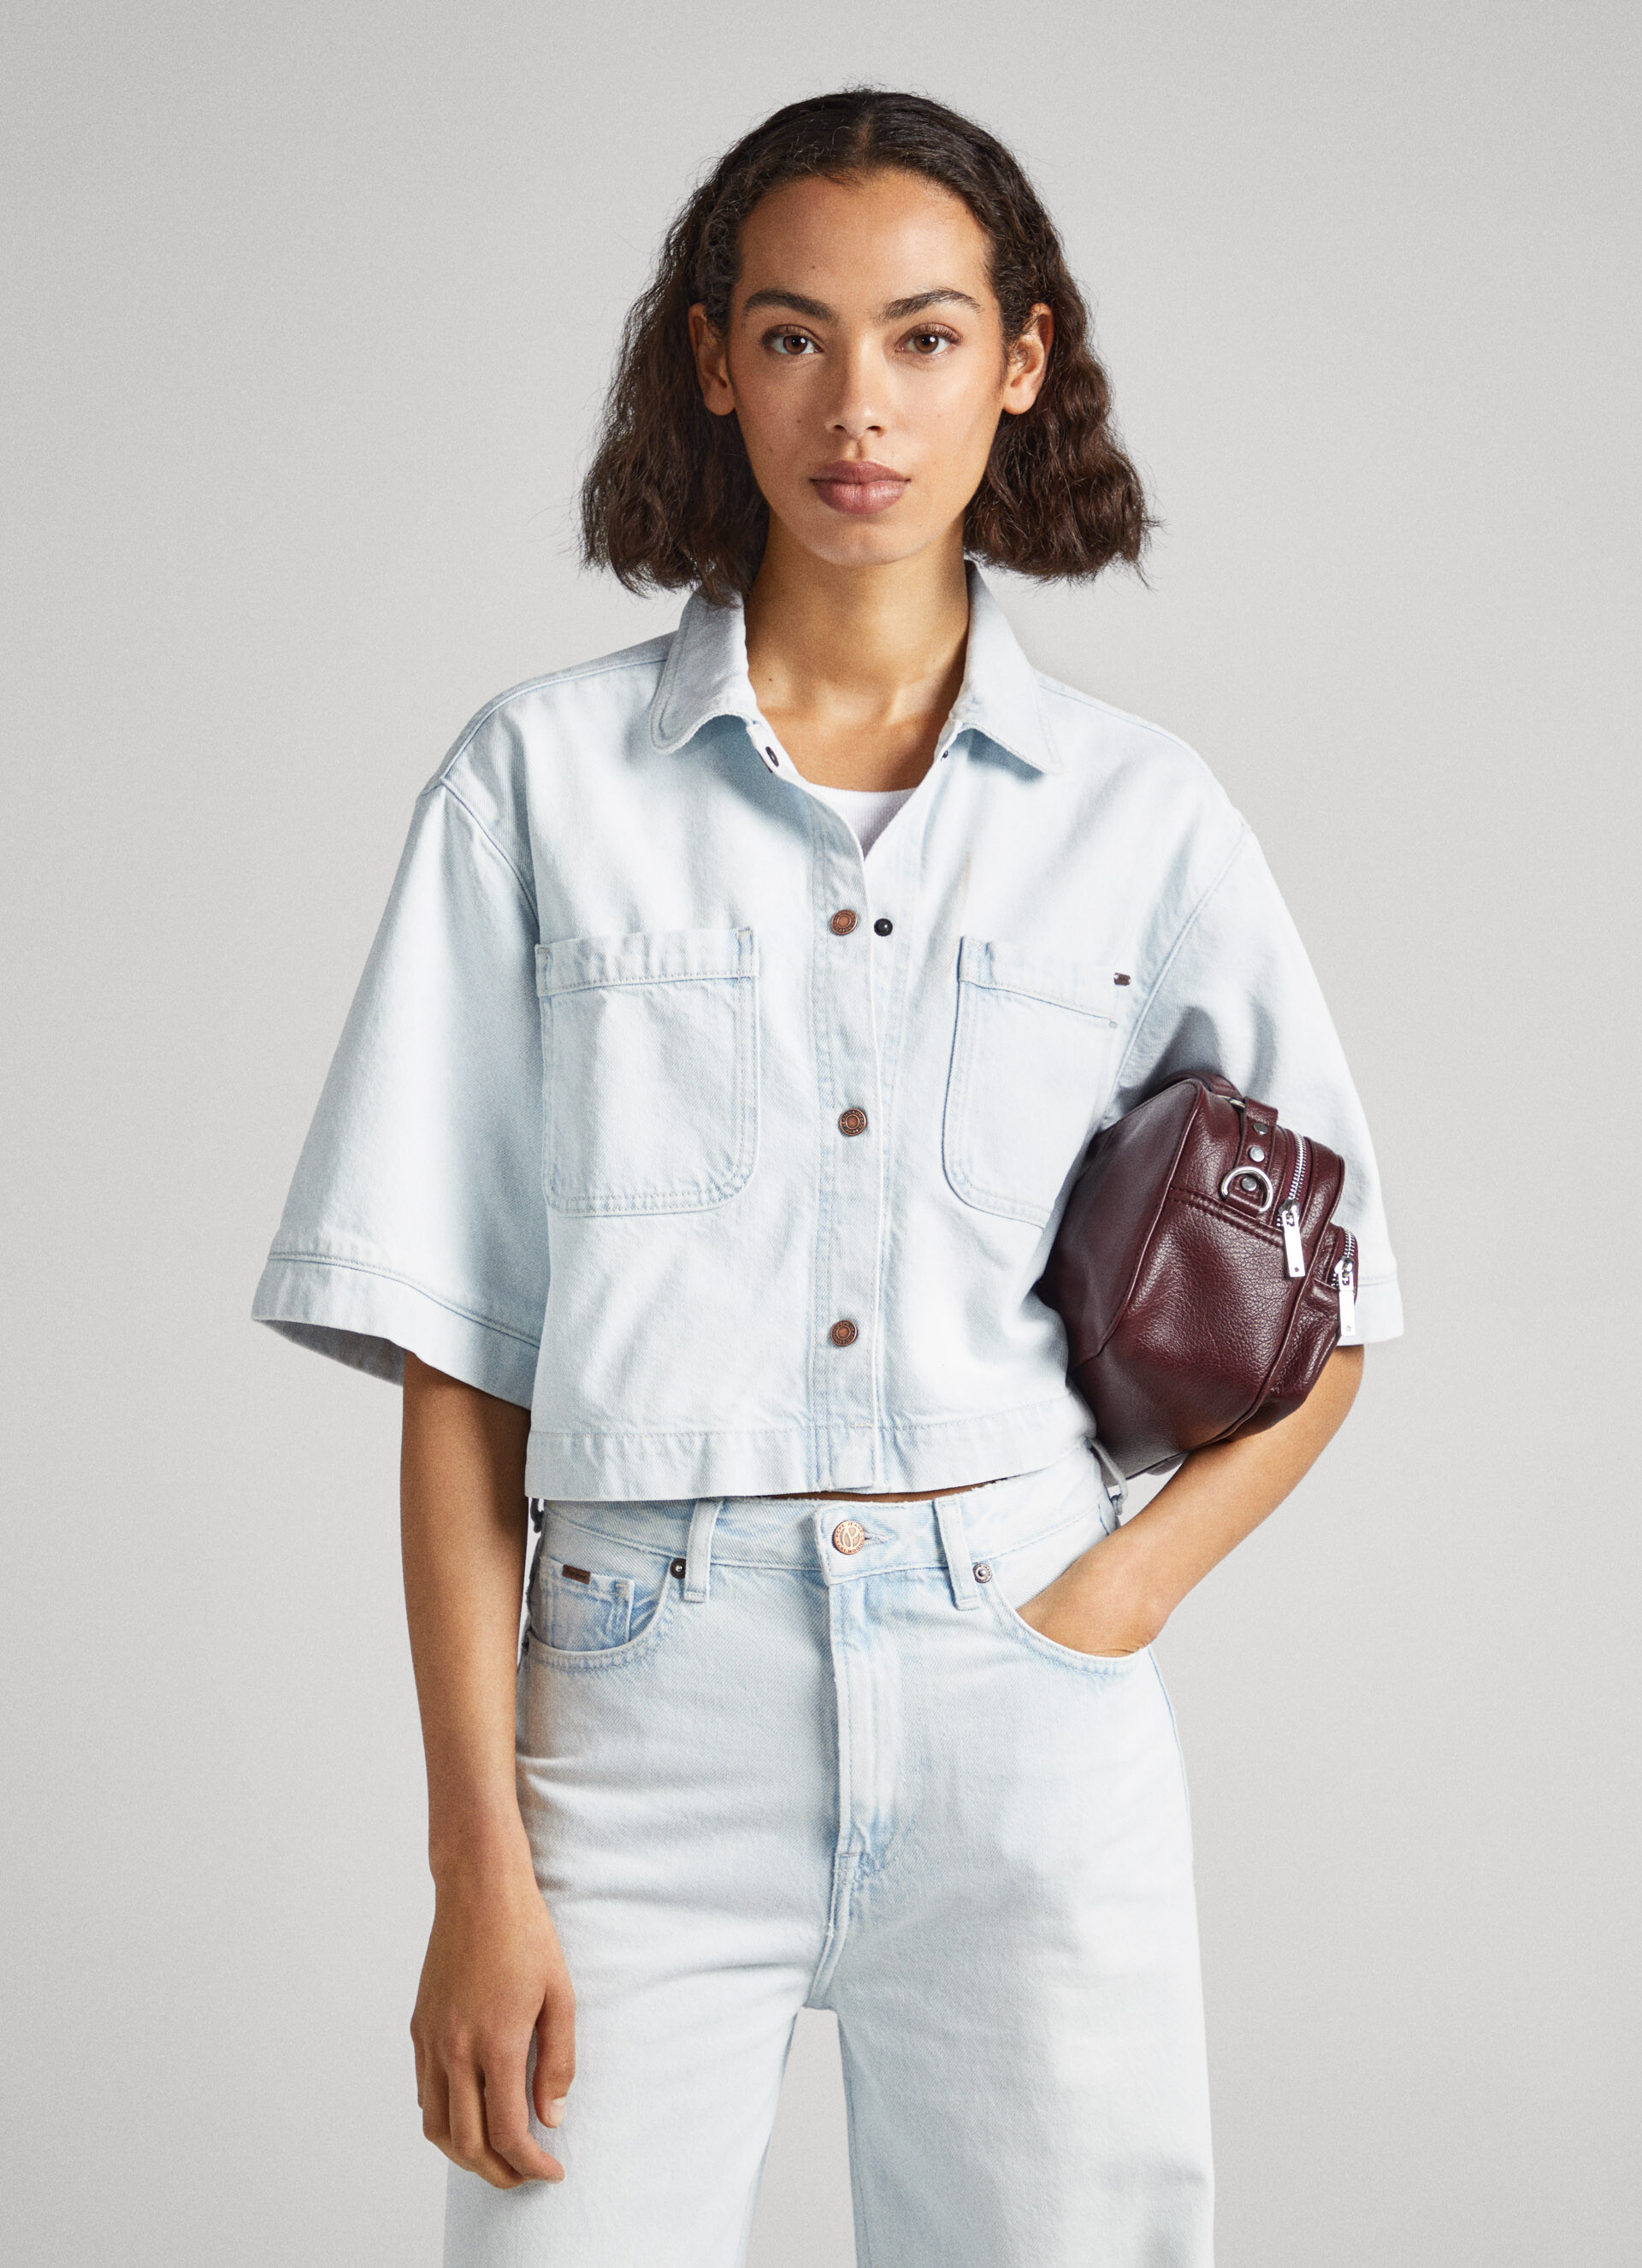 Forever 21 KnotFront Denim Shirt 20  28 Stylish Pieces to Make You  Best Dressed at the BBQ  POPSUGAR Fashion Photo 22